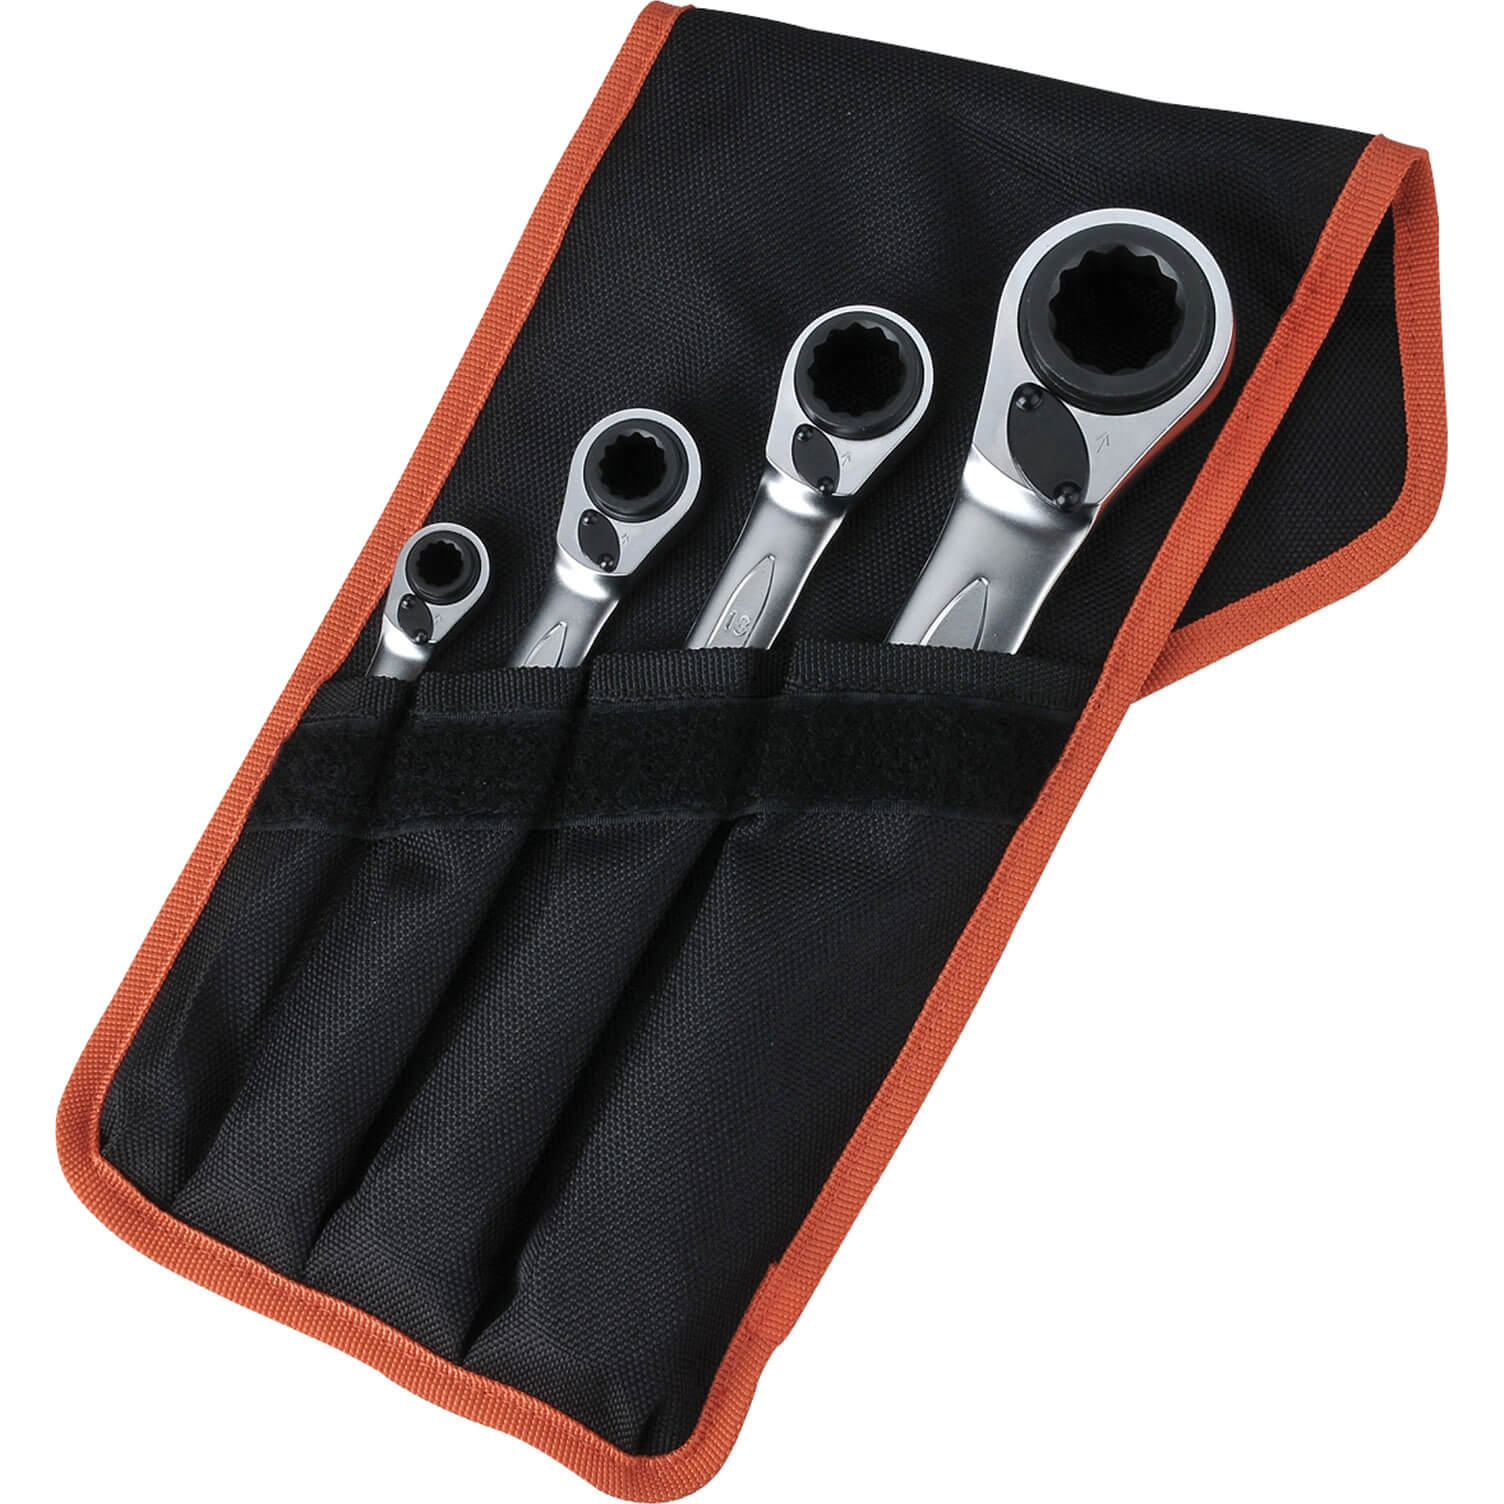 Bahco 4 Piece Reversible Ratchet Ring Spanner Set